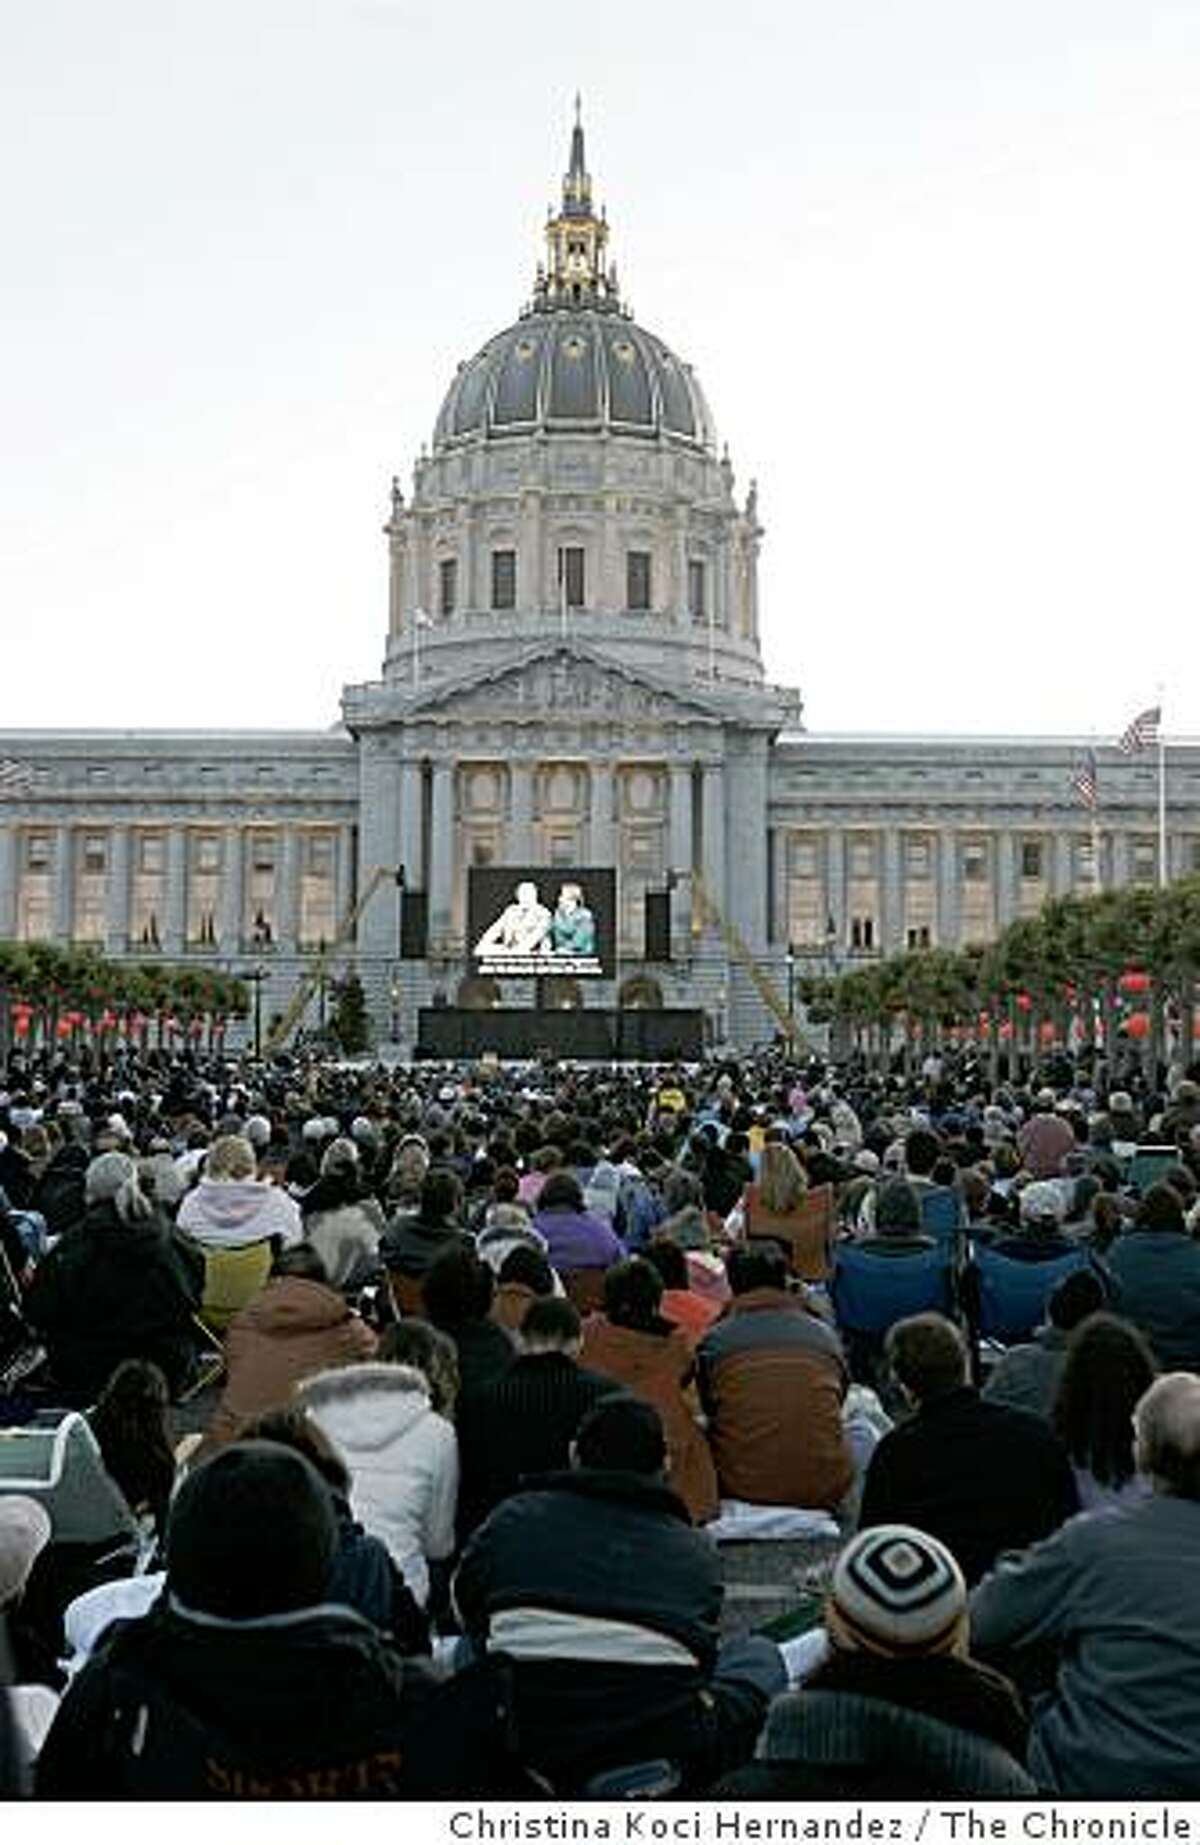 An outdoor audience, at San Francisco's Civic Center Plaza, enjoys a simulcast broadcast of San Francisco Opera's new production of Madama (cq) Butterfly. In this first new experiment to shake up and generate new audiences, the San Francisco Opera - under new general manager David Gockley- simulcasts the world premiere of this production of "Madama(cq) Butterfly" on a single, 16-foot x 24-foot LED screen.